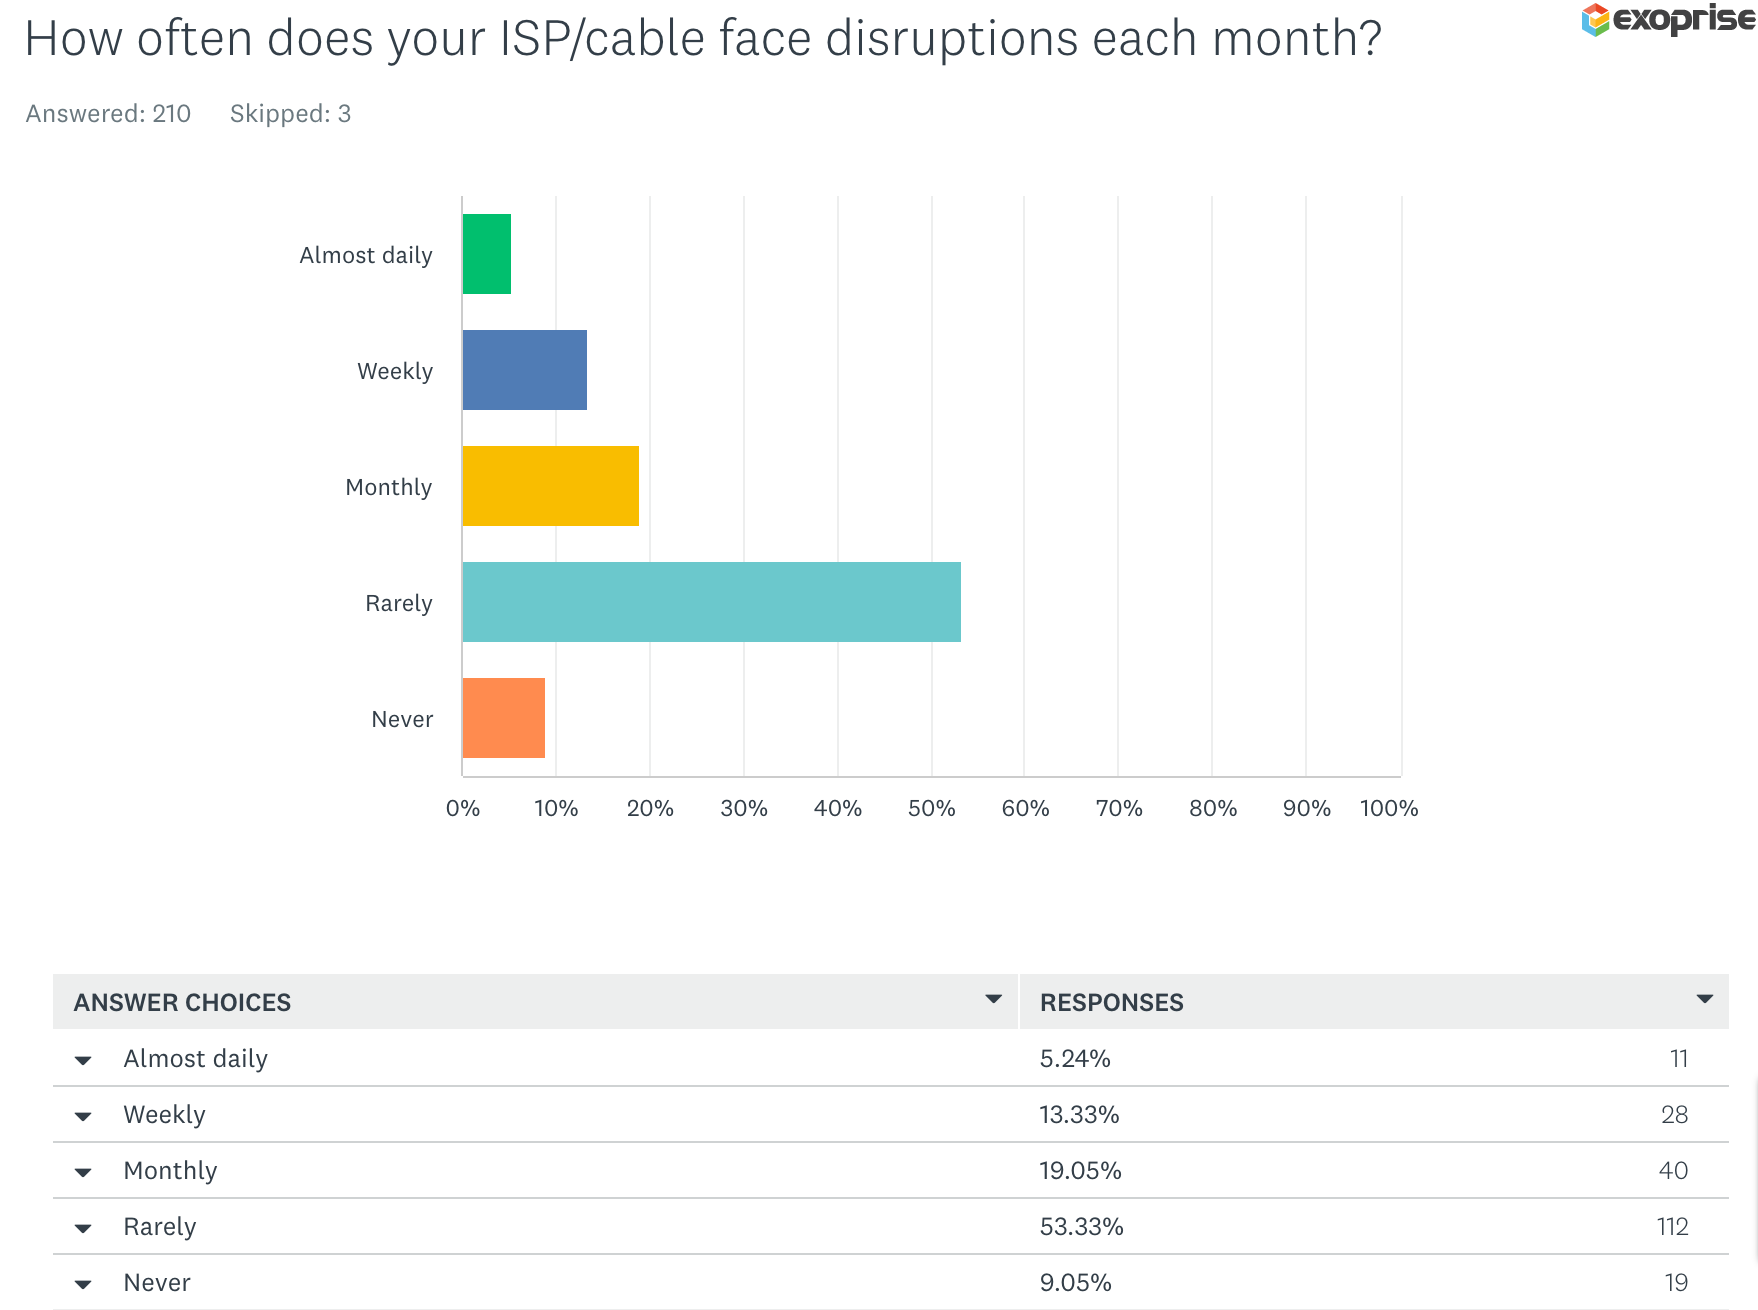 Do you face ISP outages and disruptions each month?